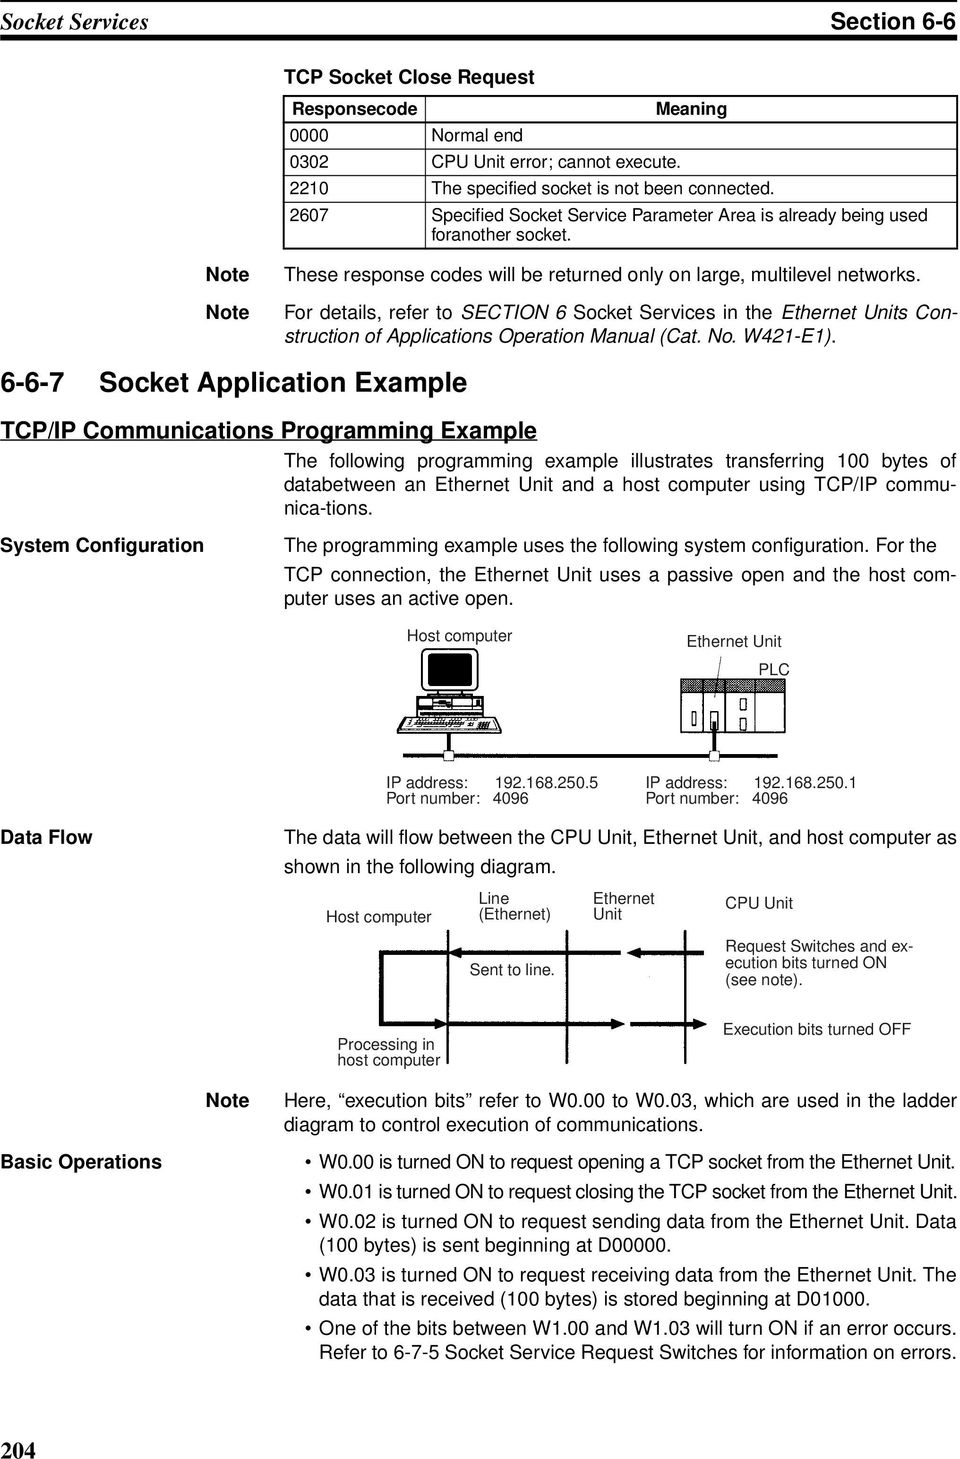 6-6-7 Socket Application Example TCP/IP Communications Programming Example The following programming example illustrates transferring 100 bytes of databetween an Ethernet Unit and a host computer